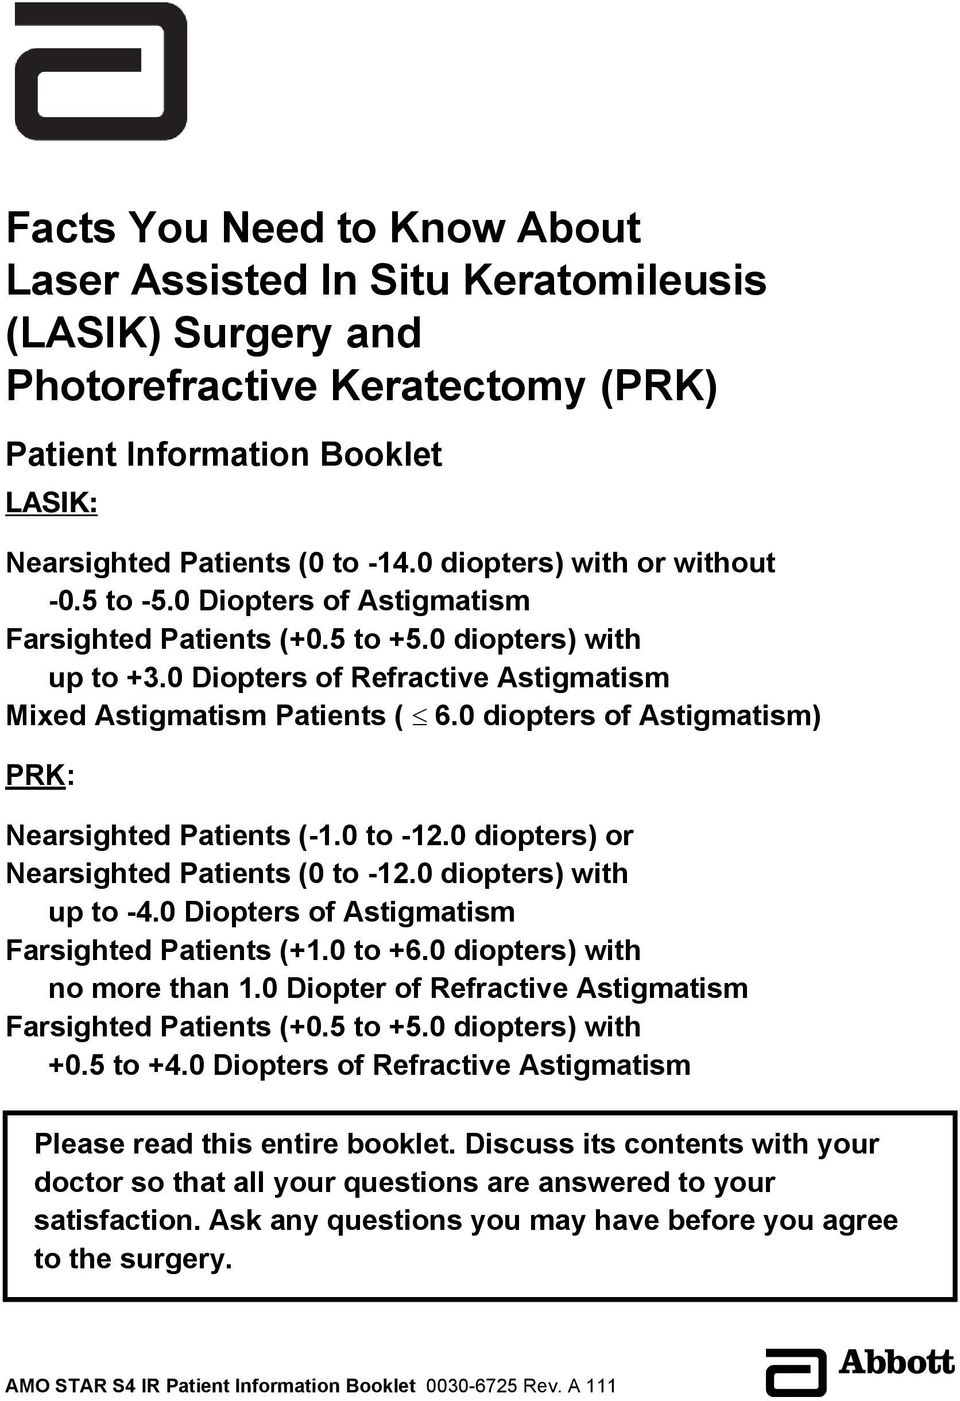 0 diopters of Astigmatism) PRK: Nearsighted Patients (-1.0 to -12.0 diopters) or Nearsighted Patients (0 to -12.0 diopters) with up to -4.0 Diopters of Astigmatism Farsighted Patients (+1.0 to +6.